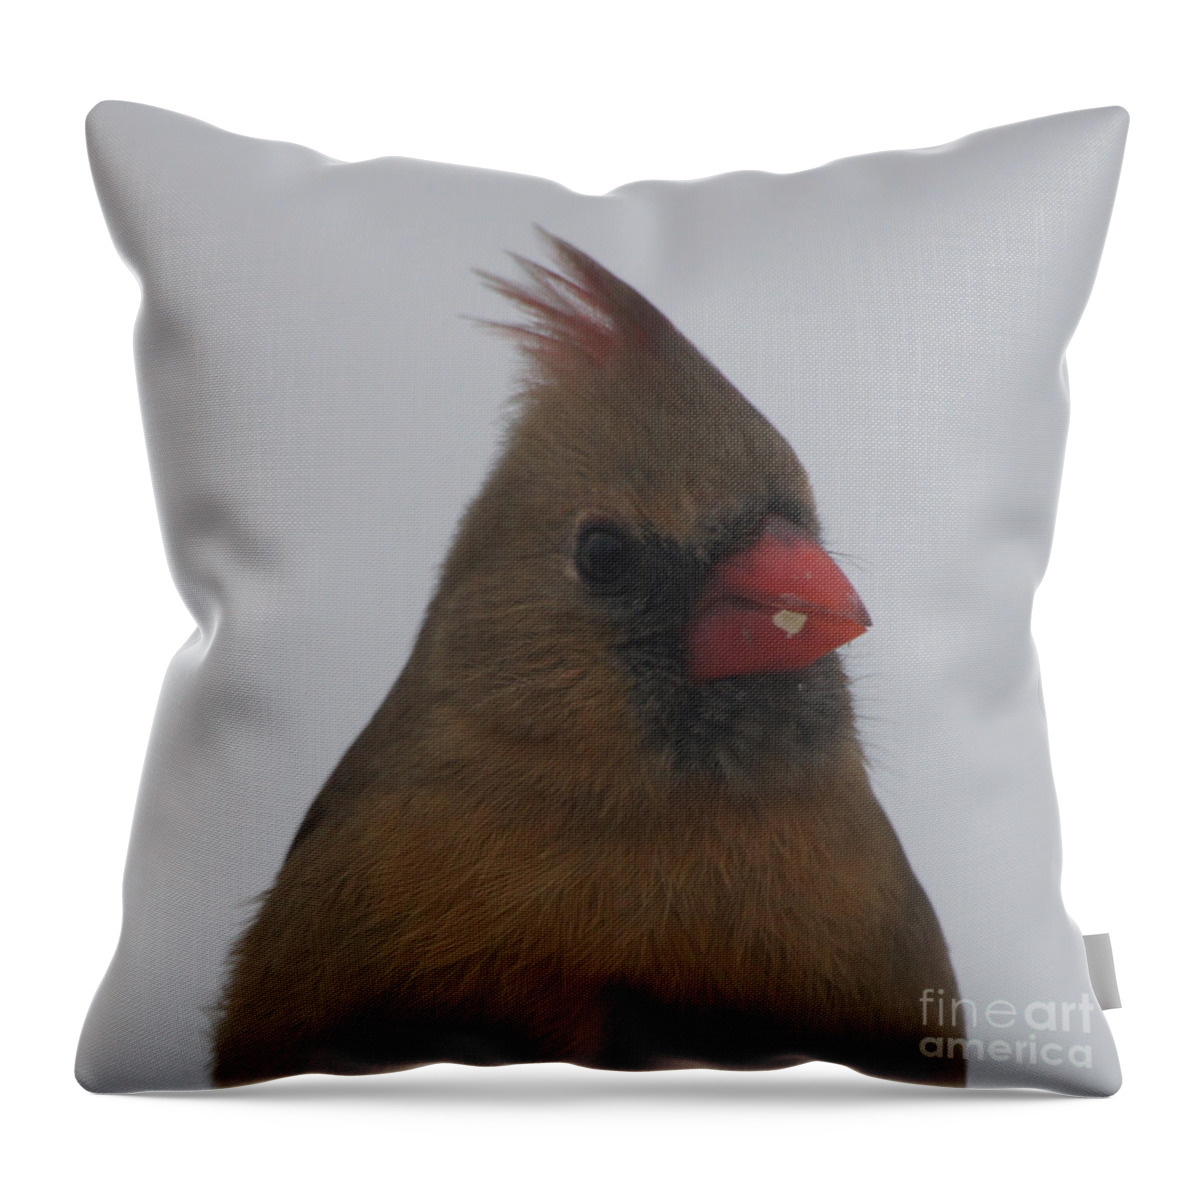 Photograph Throw Pillow featuring the photograph Cardinal Female - Ready for Spring by Robert E Alter Reflections of Infinity